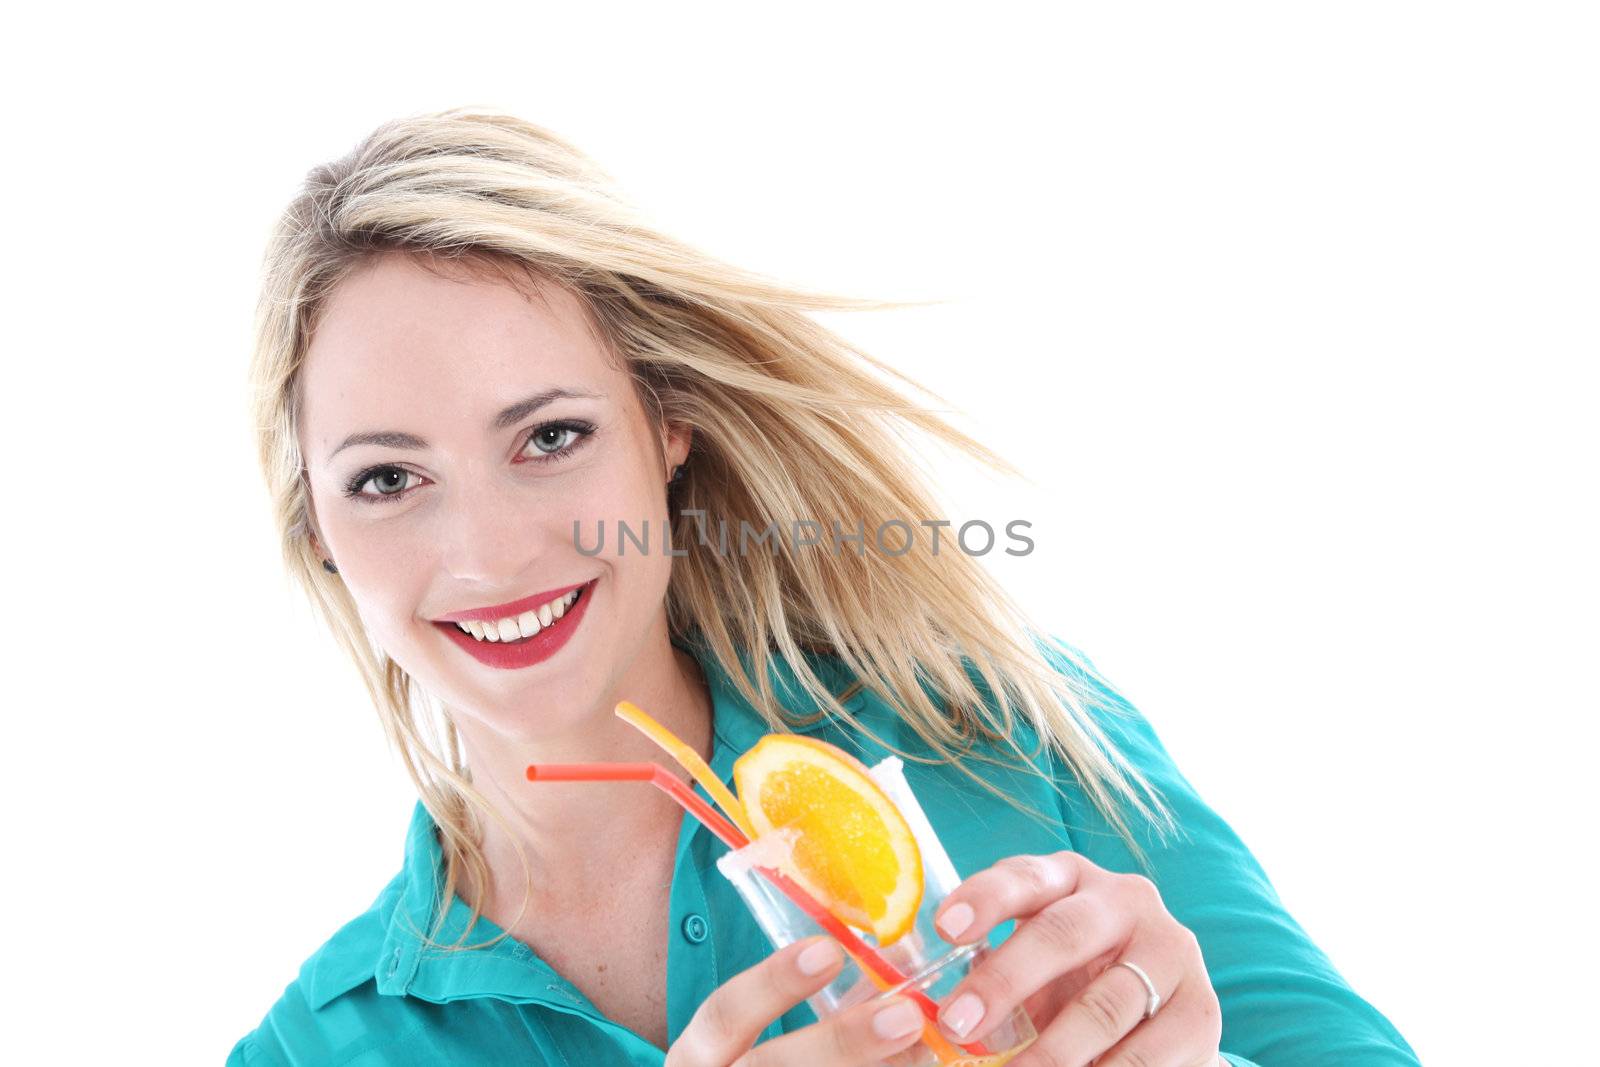 Beautiful carefree woman with the wind in her hair and a joyful smile holding a glass of cocktail on a tropical vacation Beautiful carefree woman with the wind in her hair and a merry smile holding a glass of cocktail on a tropical vacation 